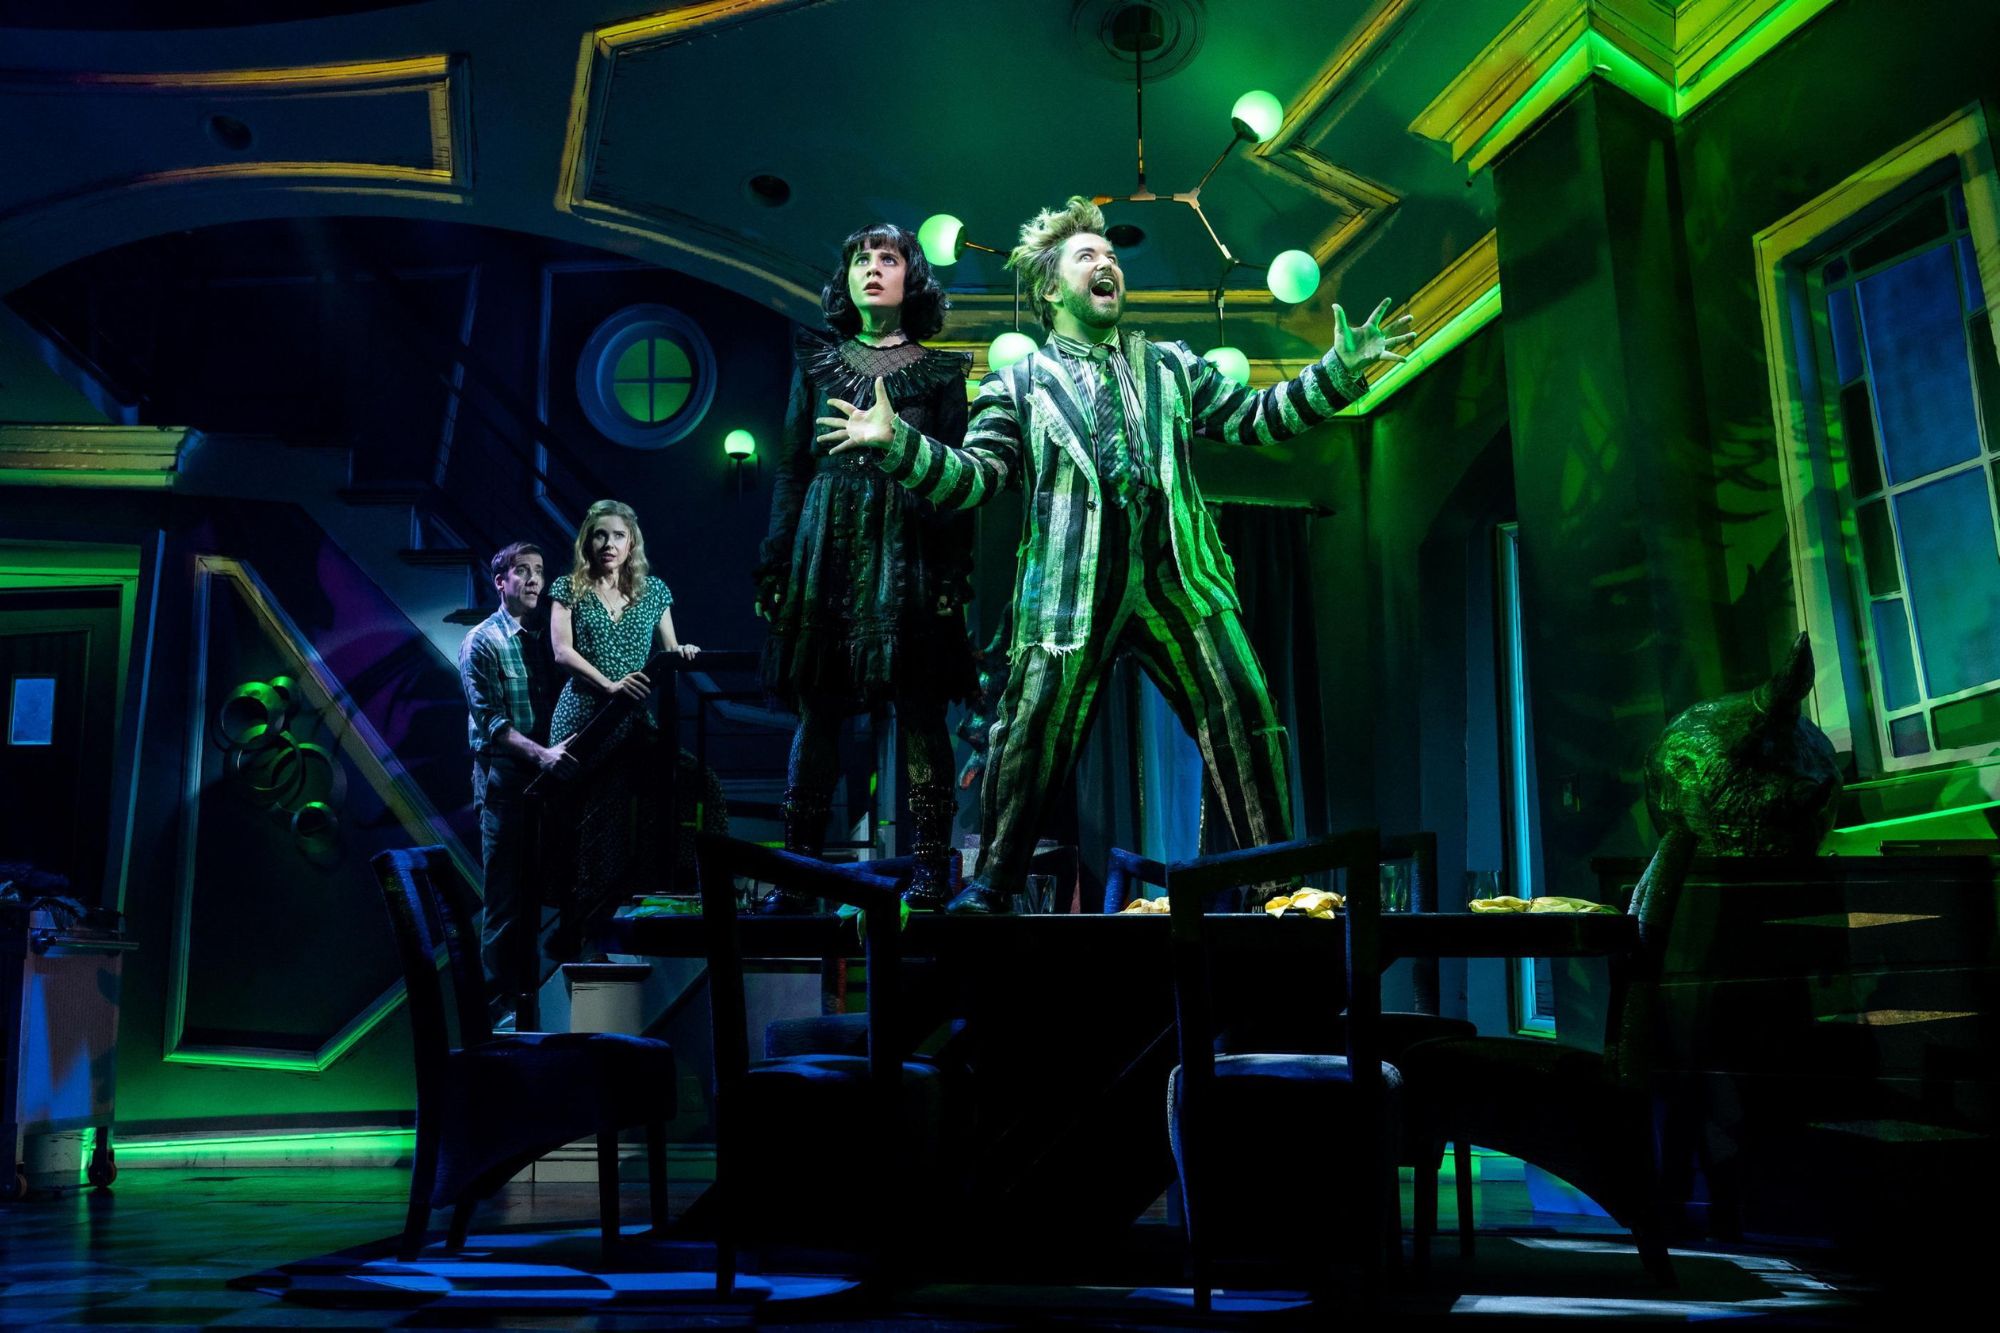 Beetlejuice comes to The Fabulous Fox in St. Louis.